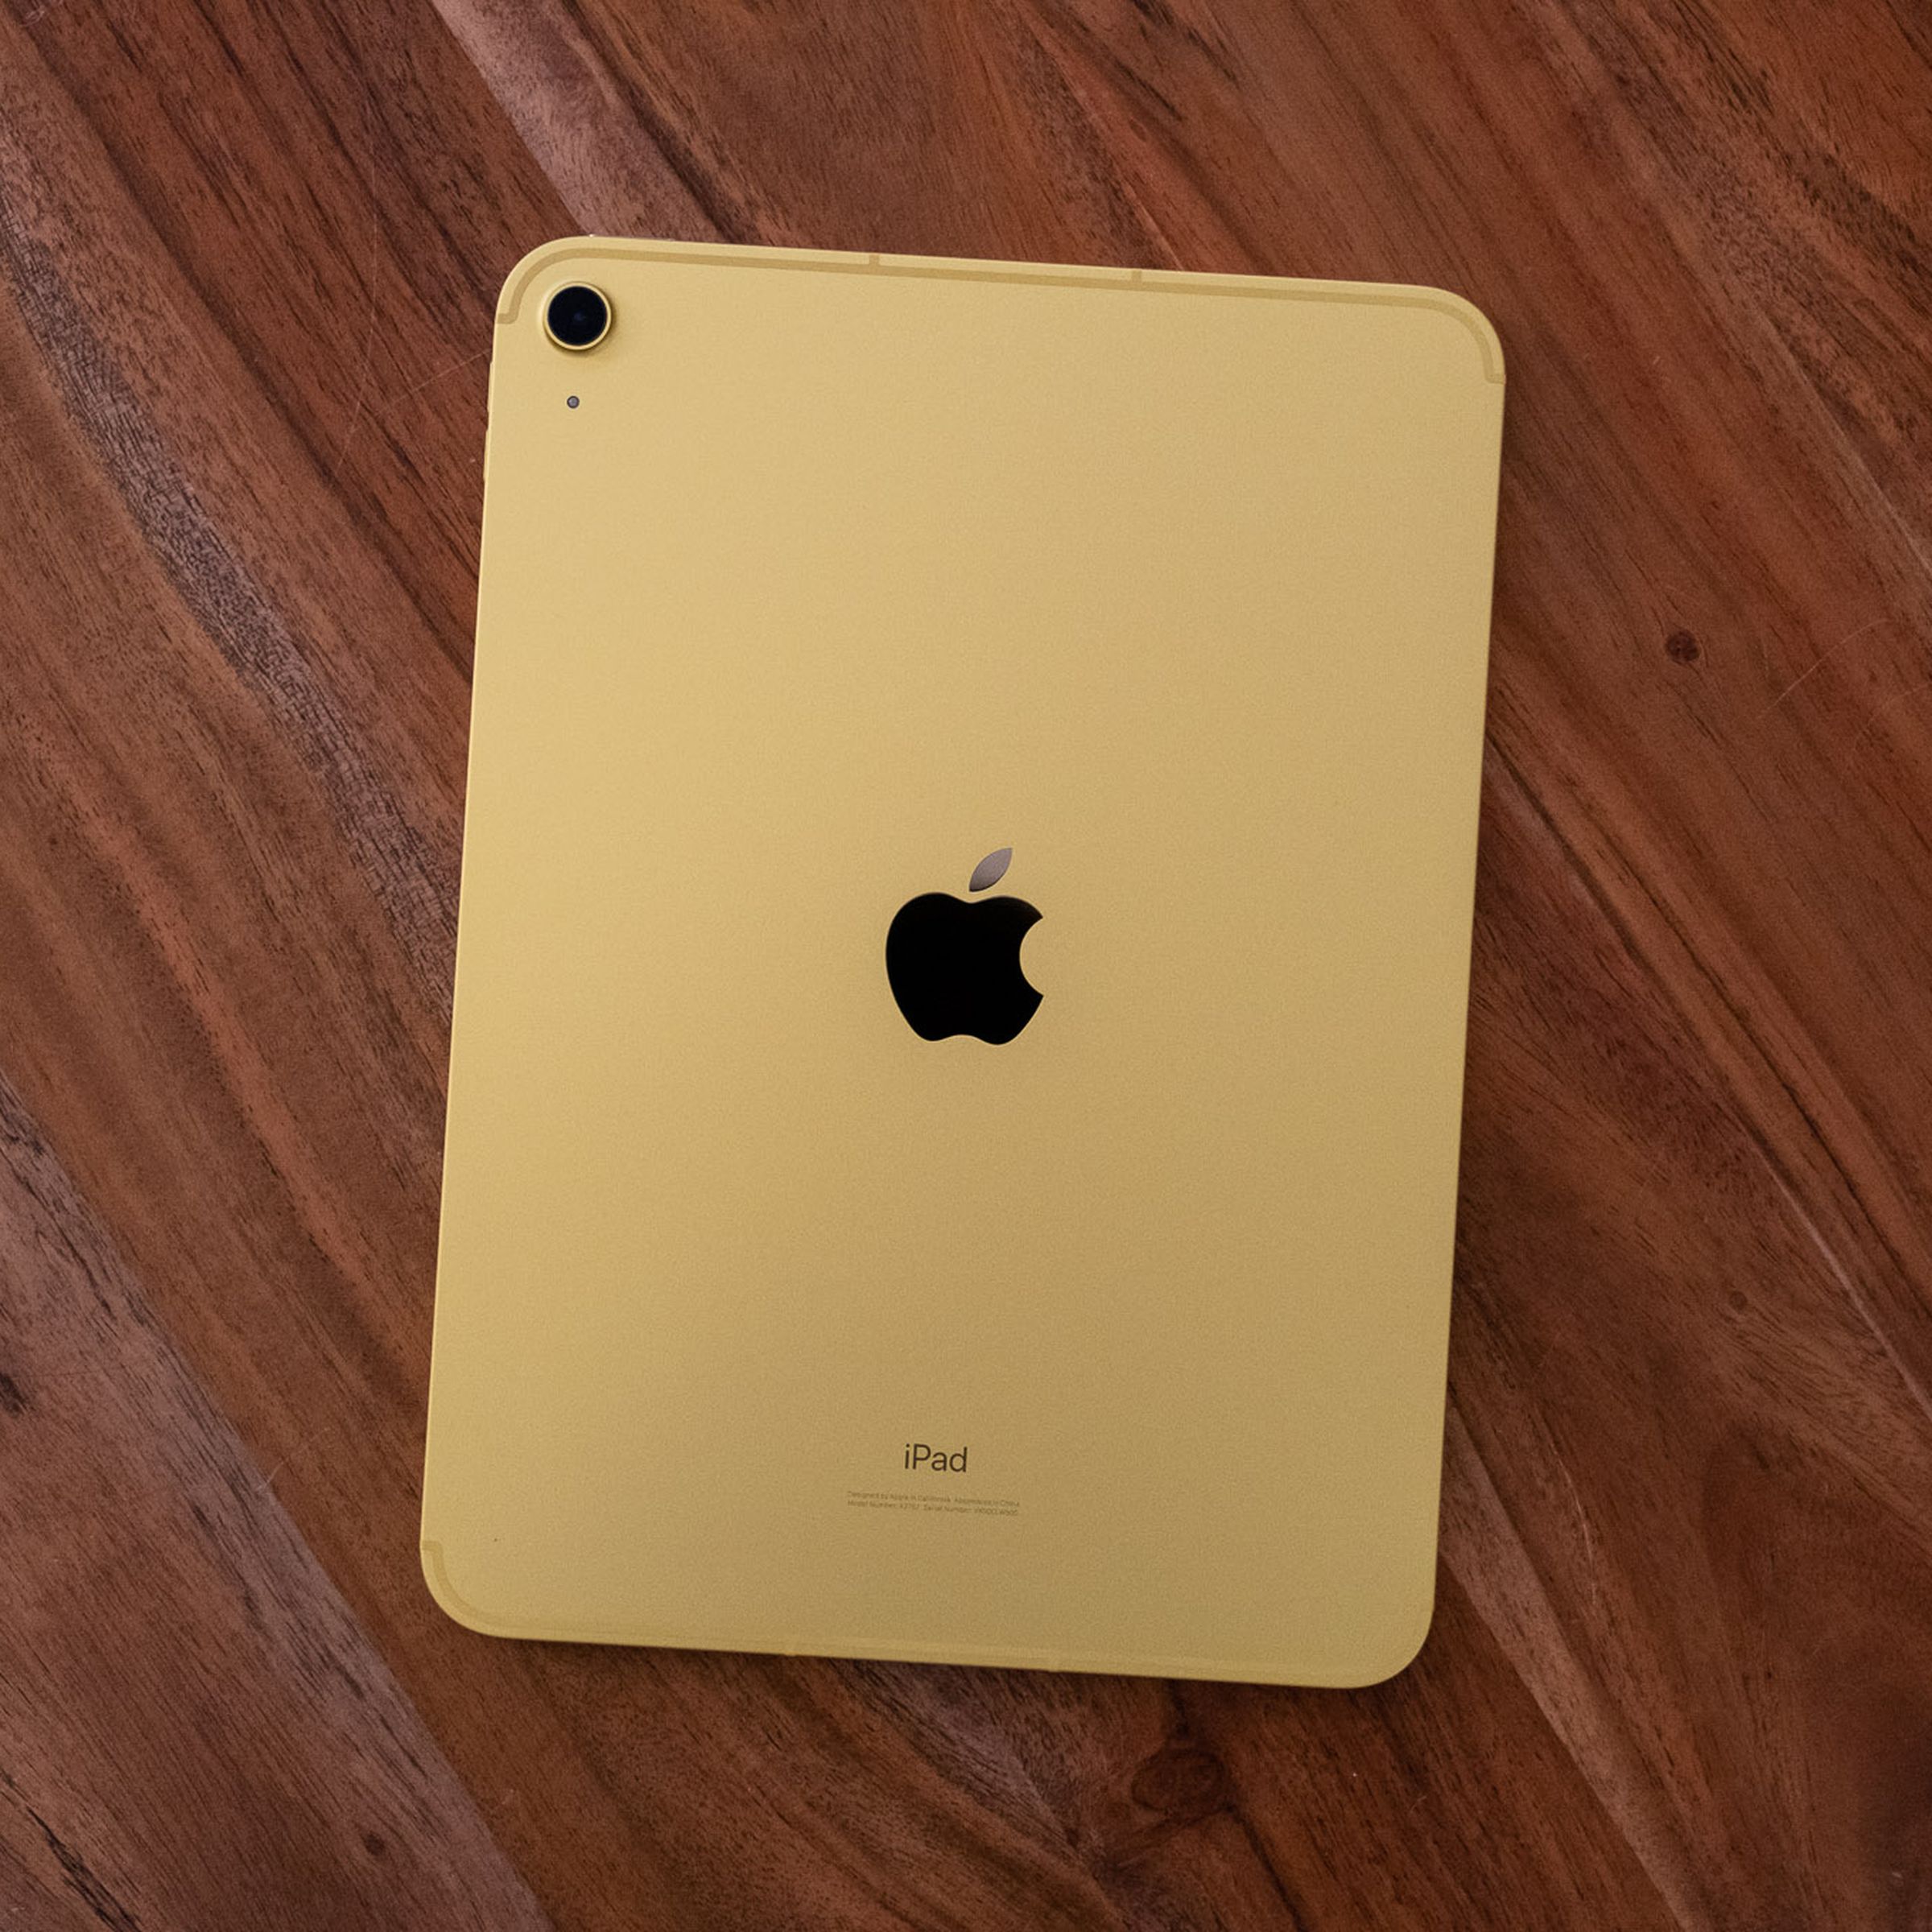 A yellow 10th gen iPad face down on a wooden table, seen from above.